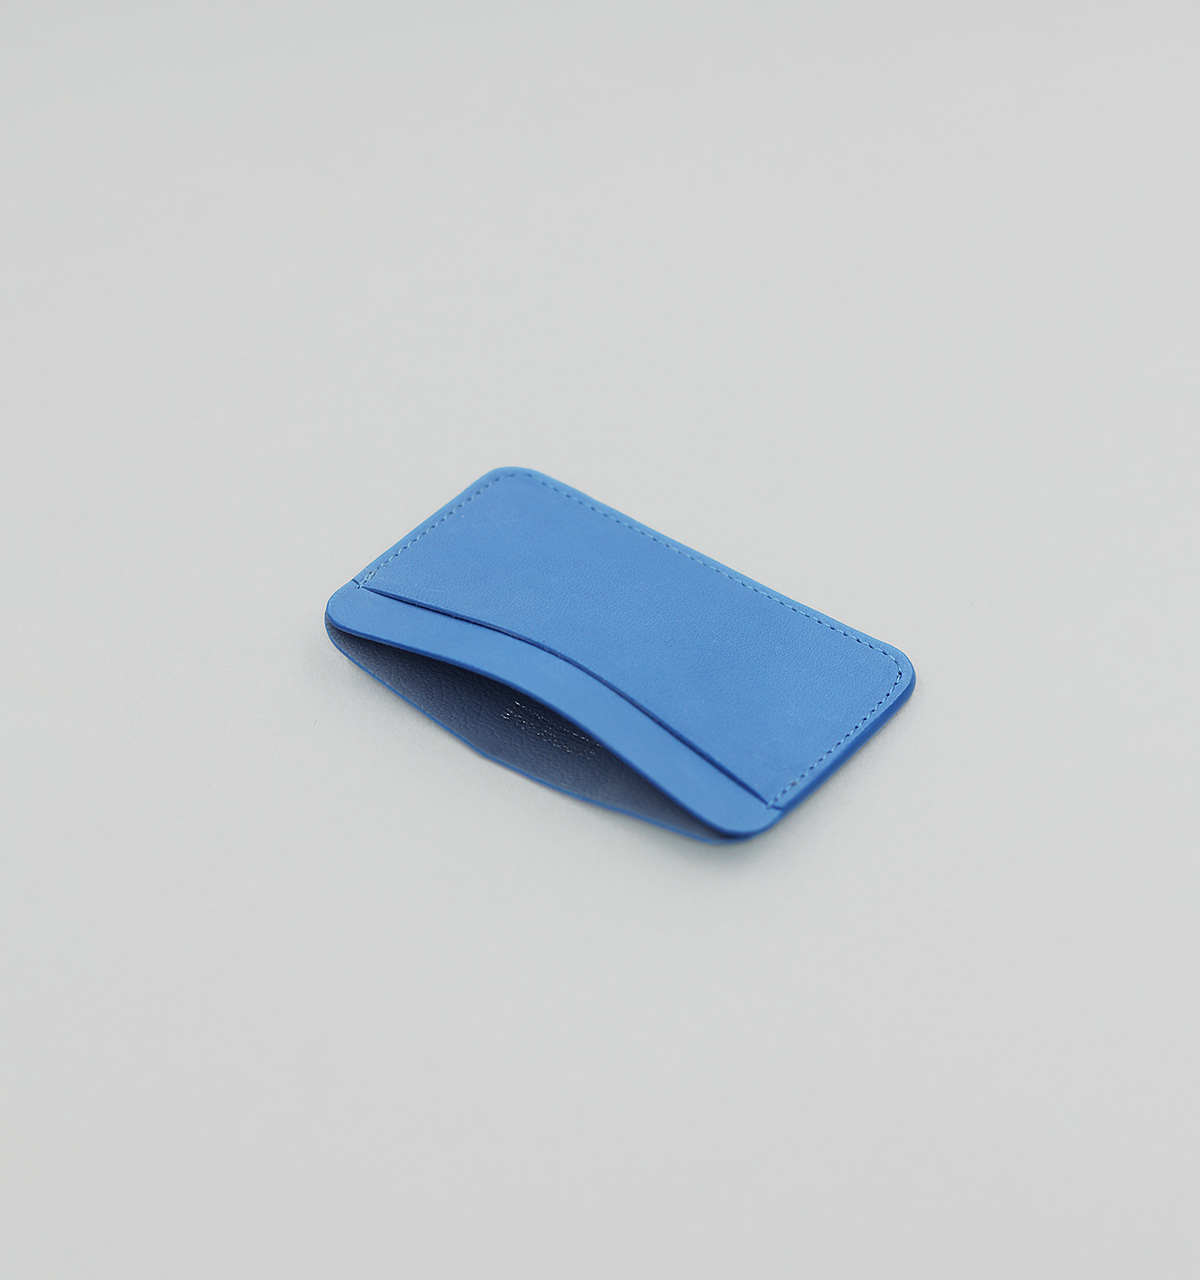 LAPERRUQUE: CARD HOLDER